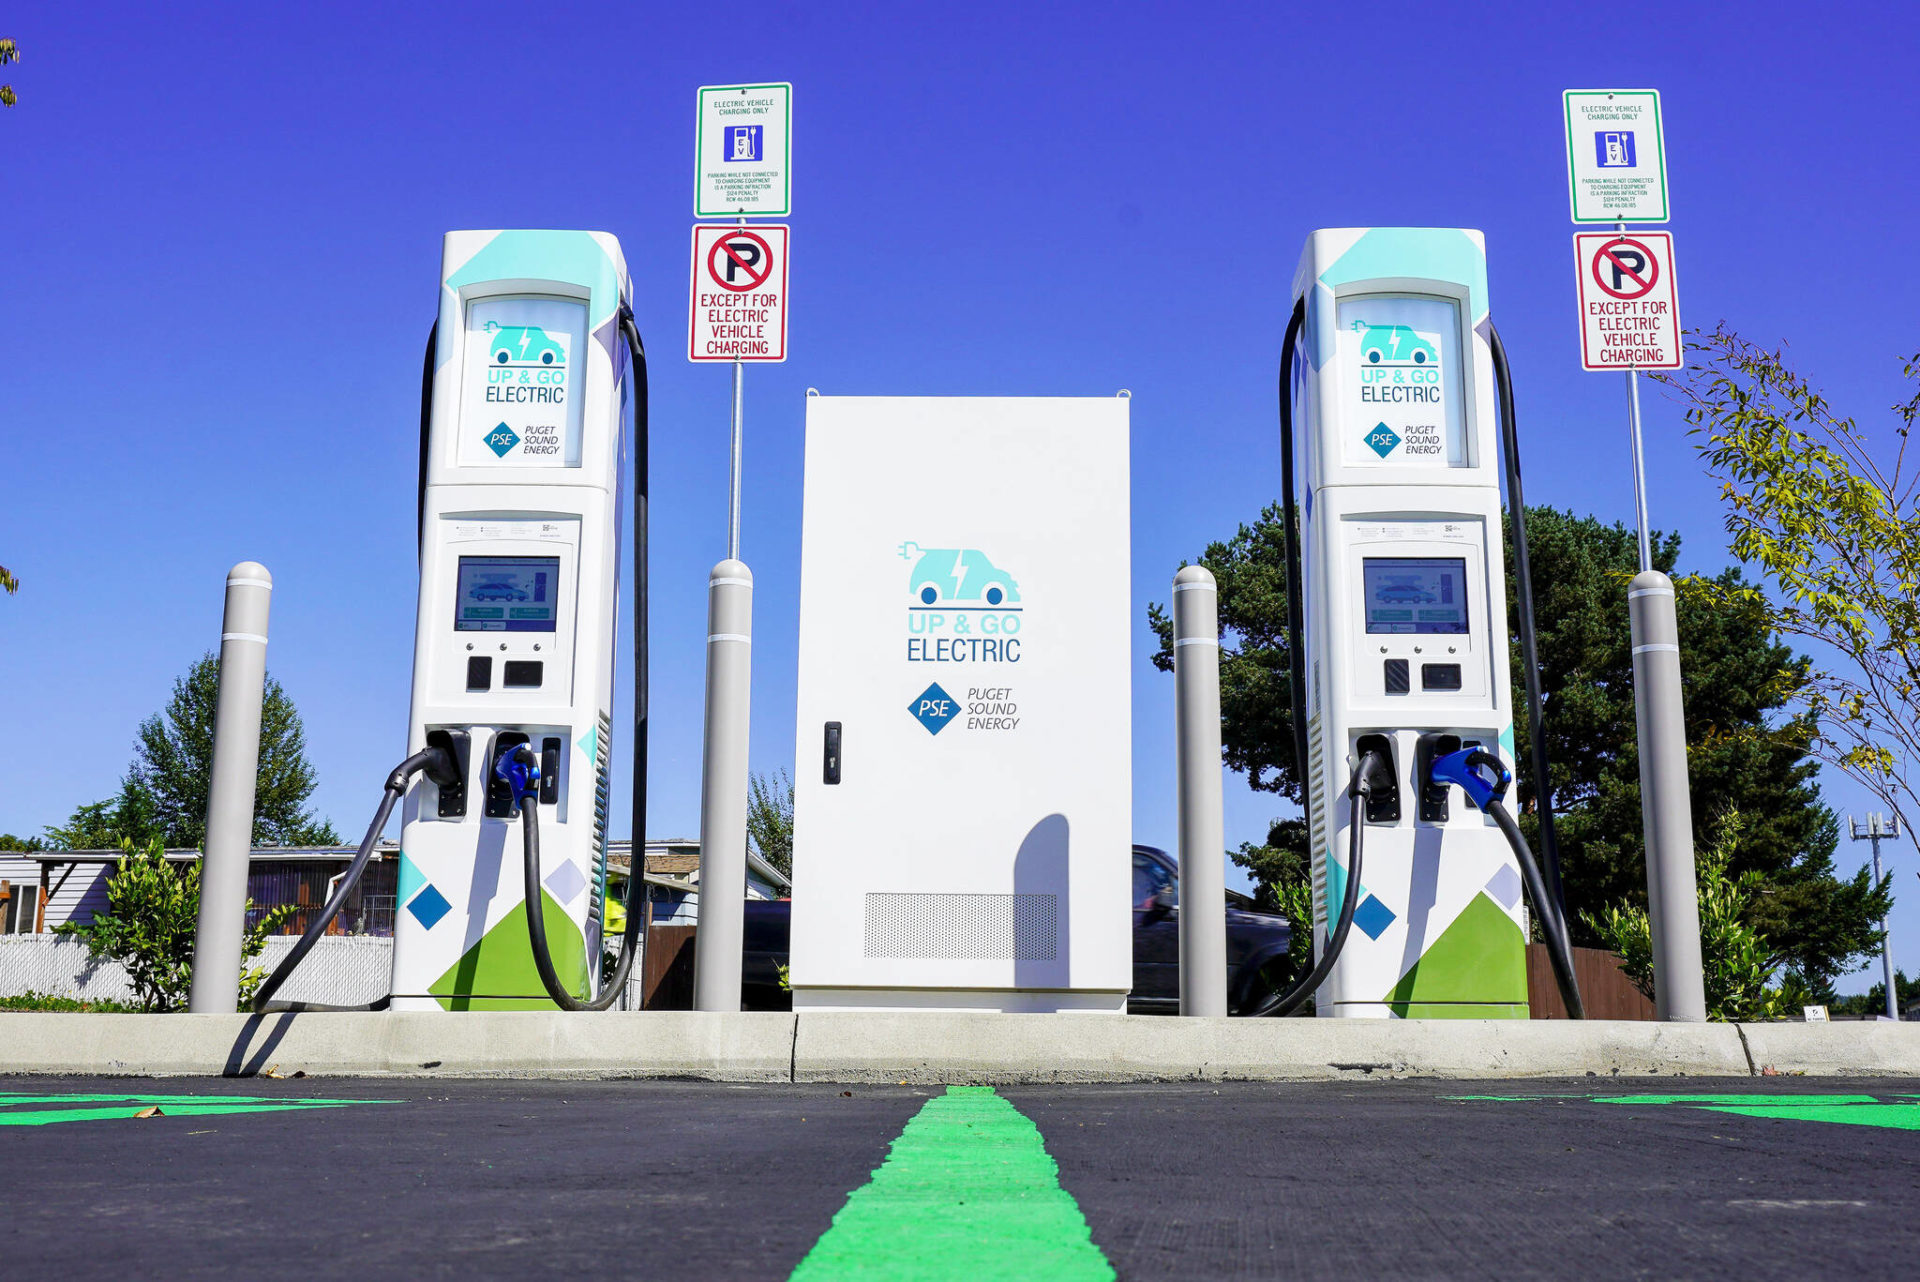 pse-rolls-out-public-electric-vehicle-charging-station-in-kent-kent